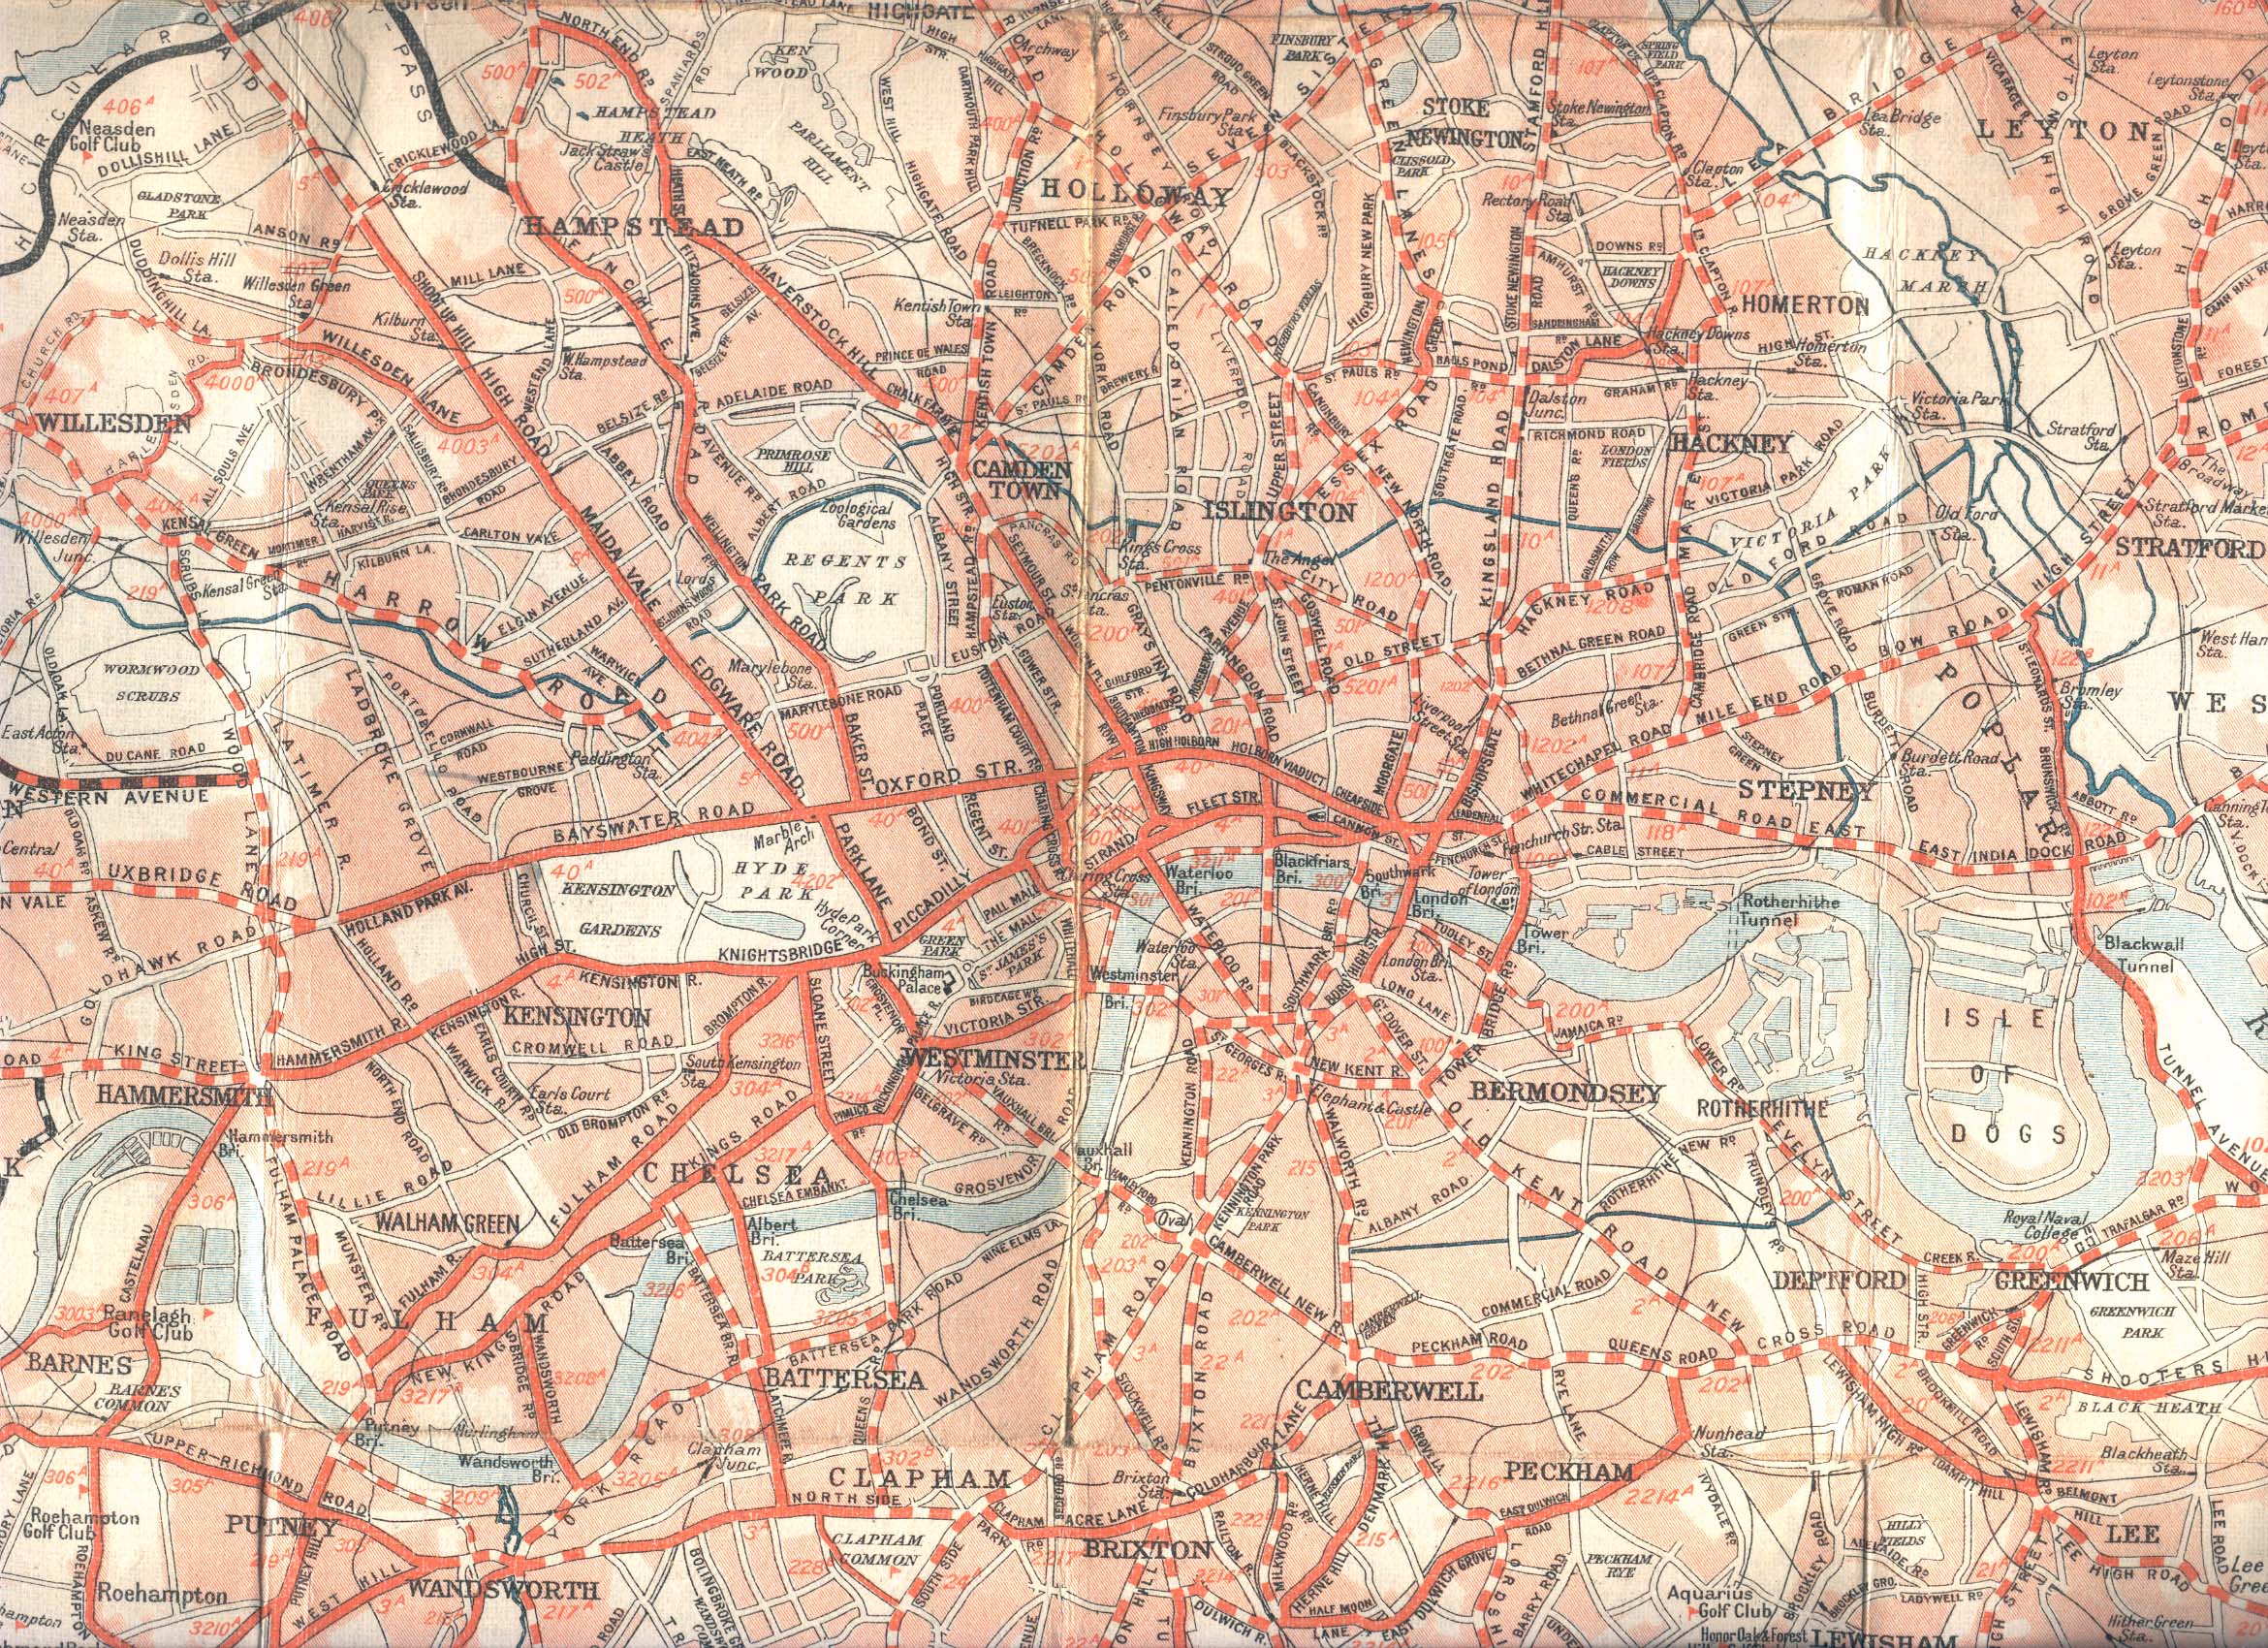 Large view - Road Map of London